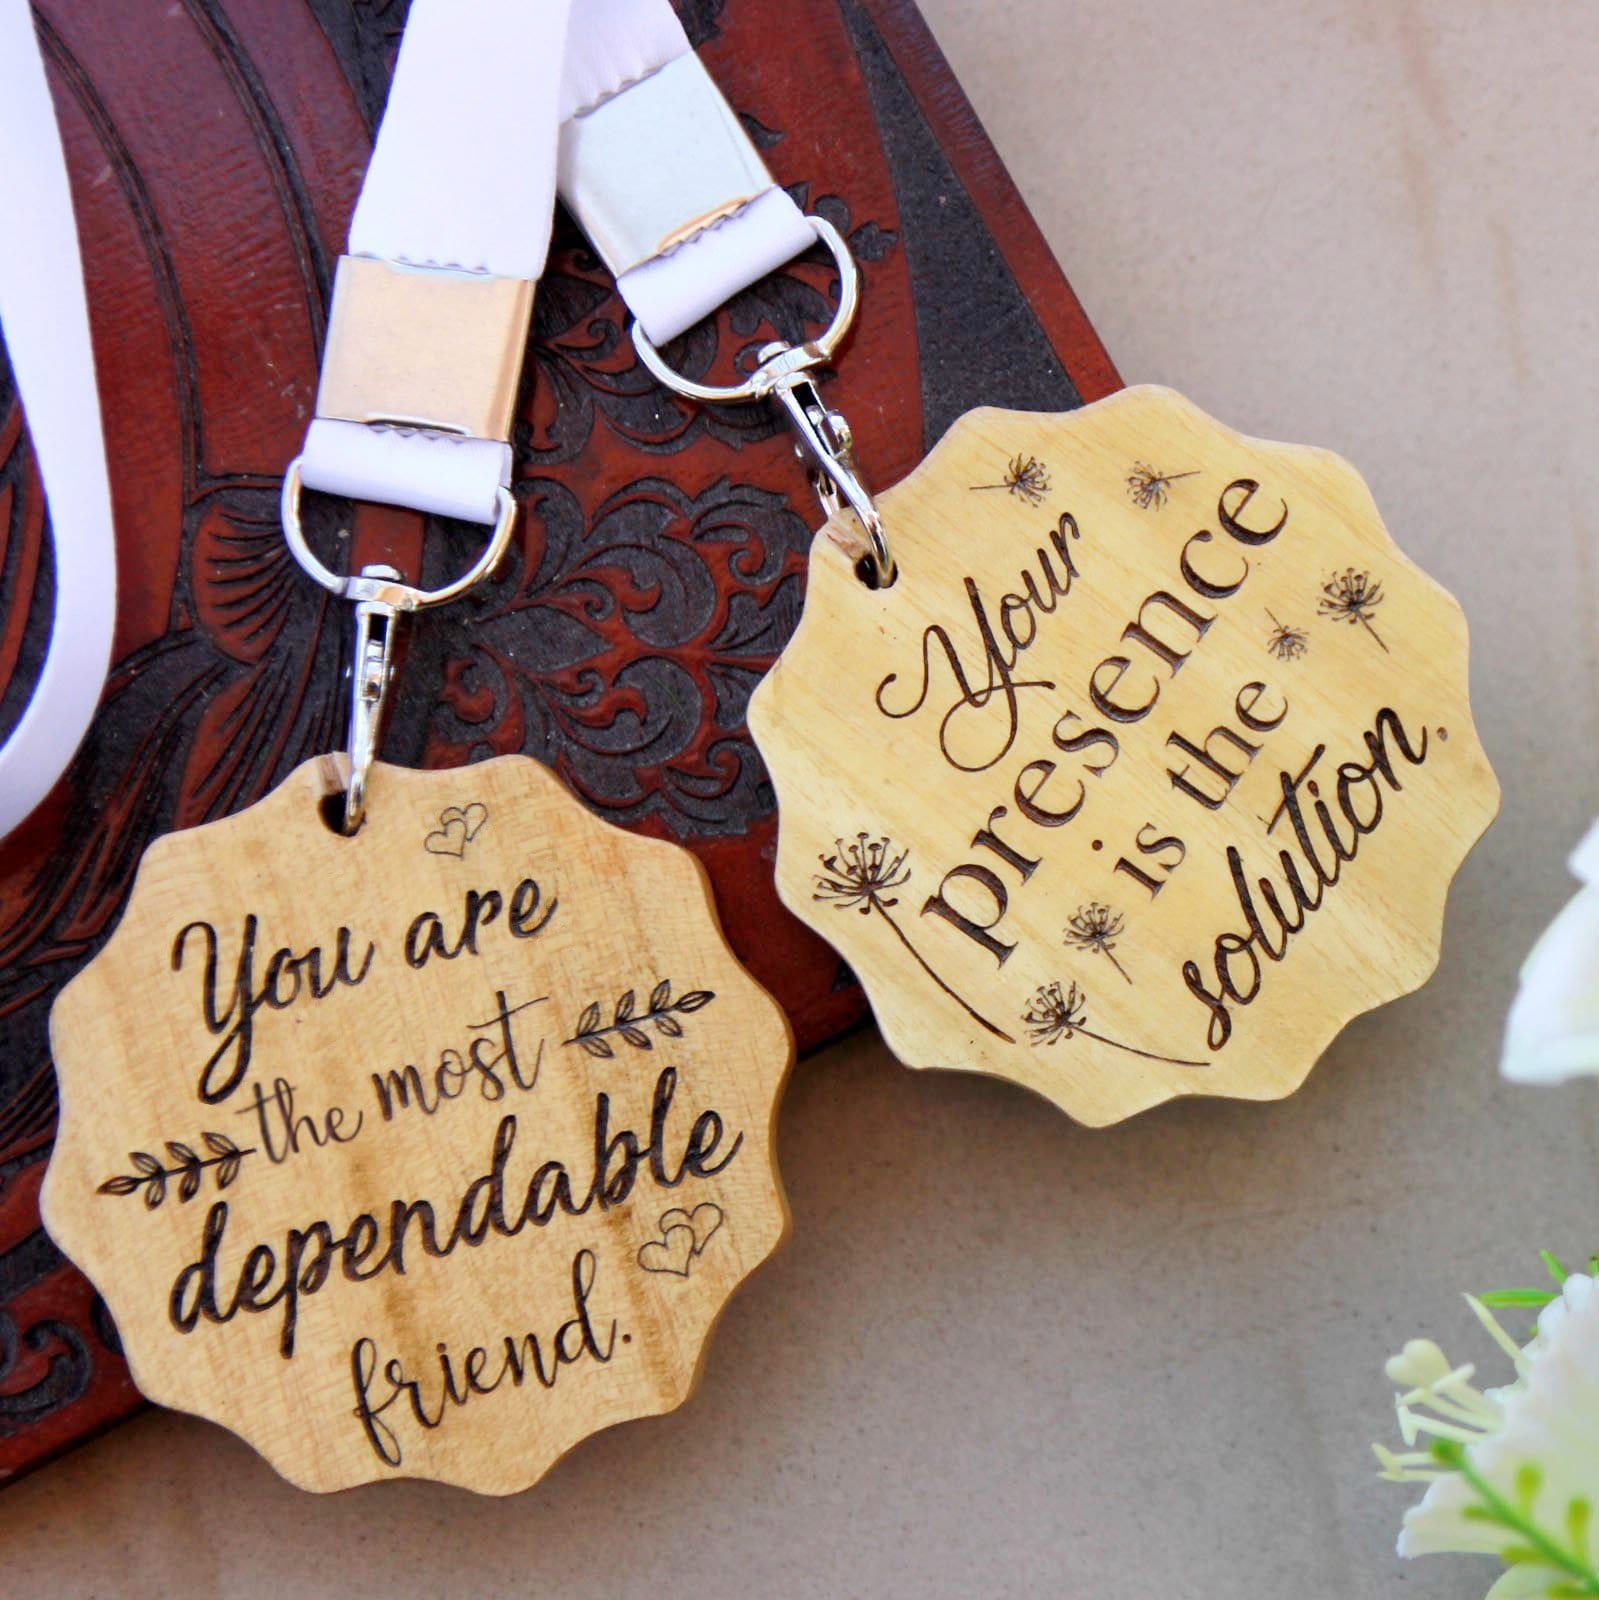 A Set Of 2 Wooden Medal For Friends Engraved With The Words: You are the most dependable friend & Your presence is the solution. These medals make affordable gifts for friends and the best personalised gifts for friends.